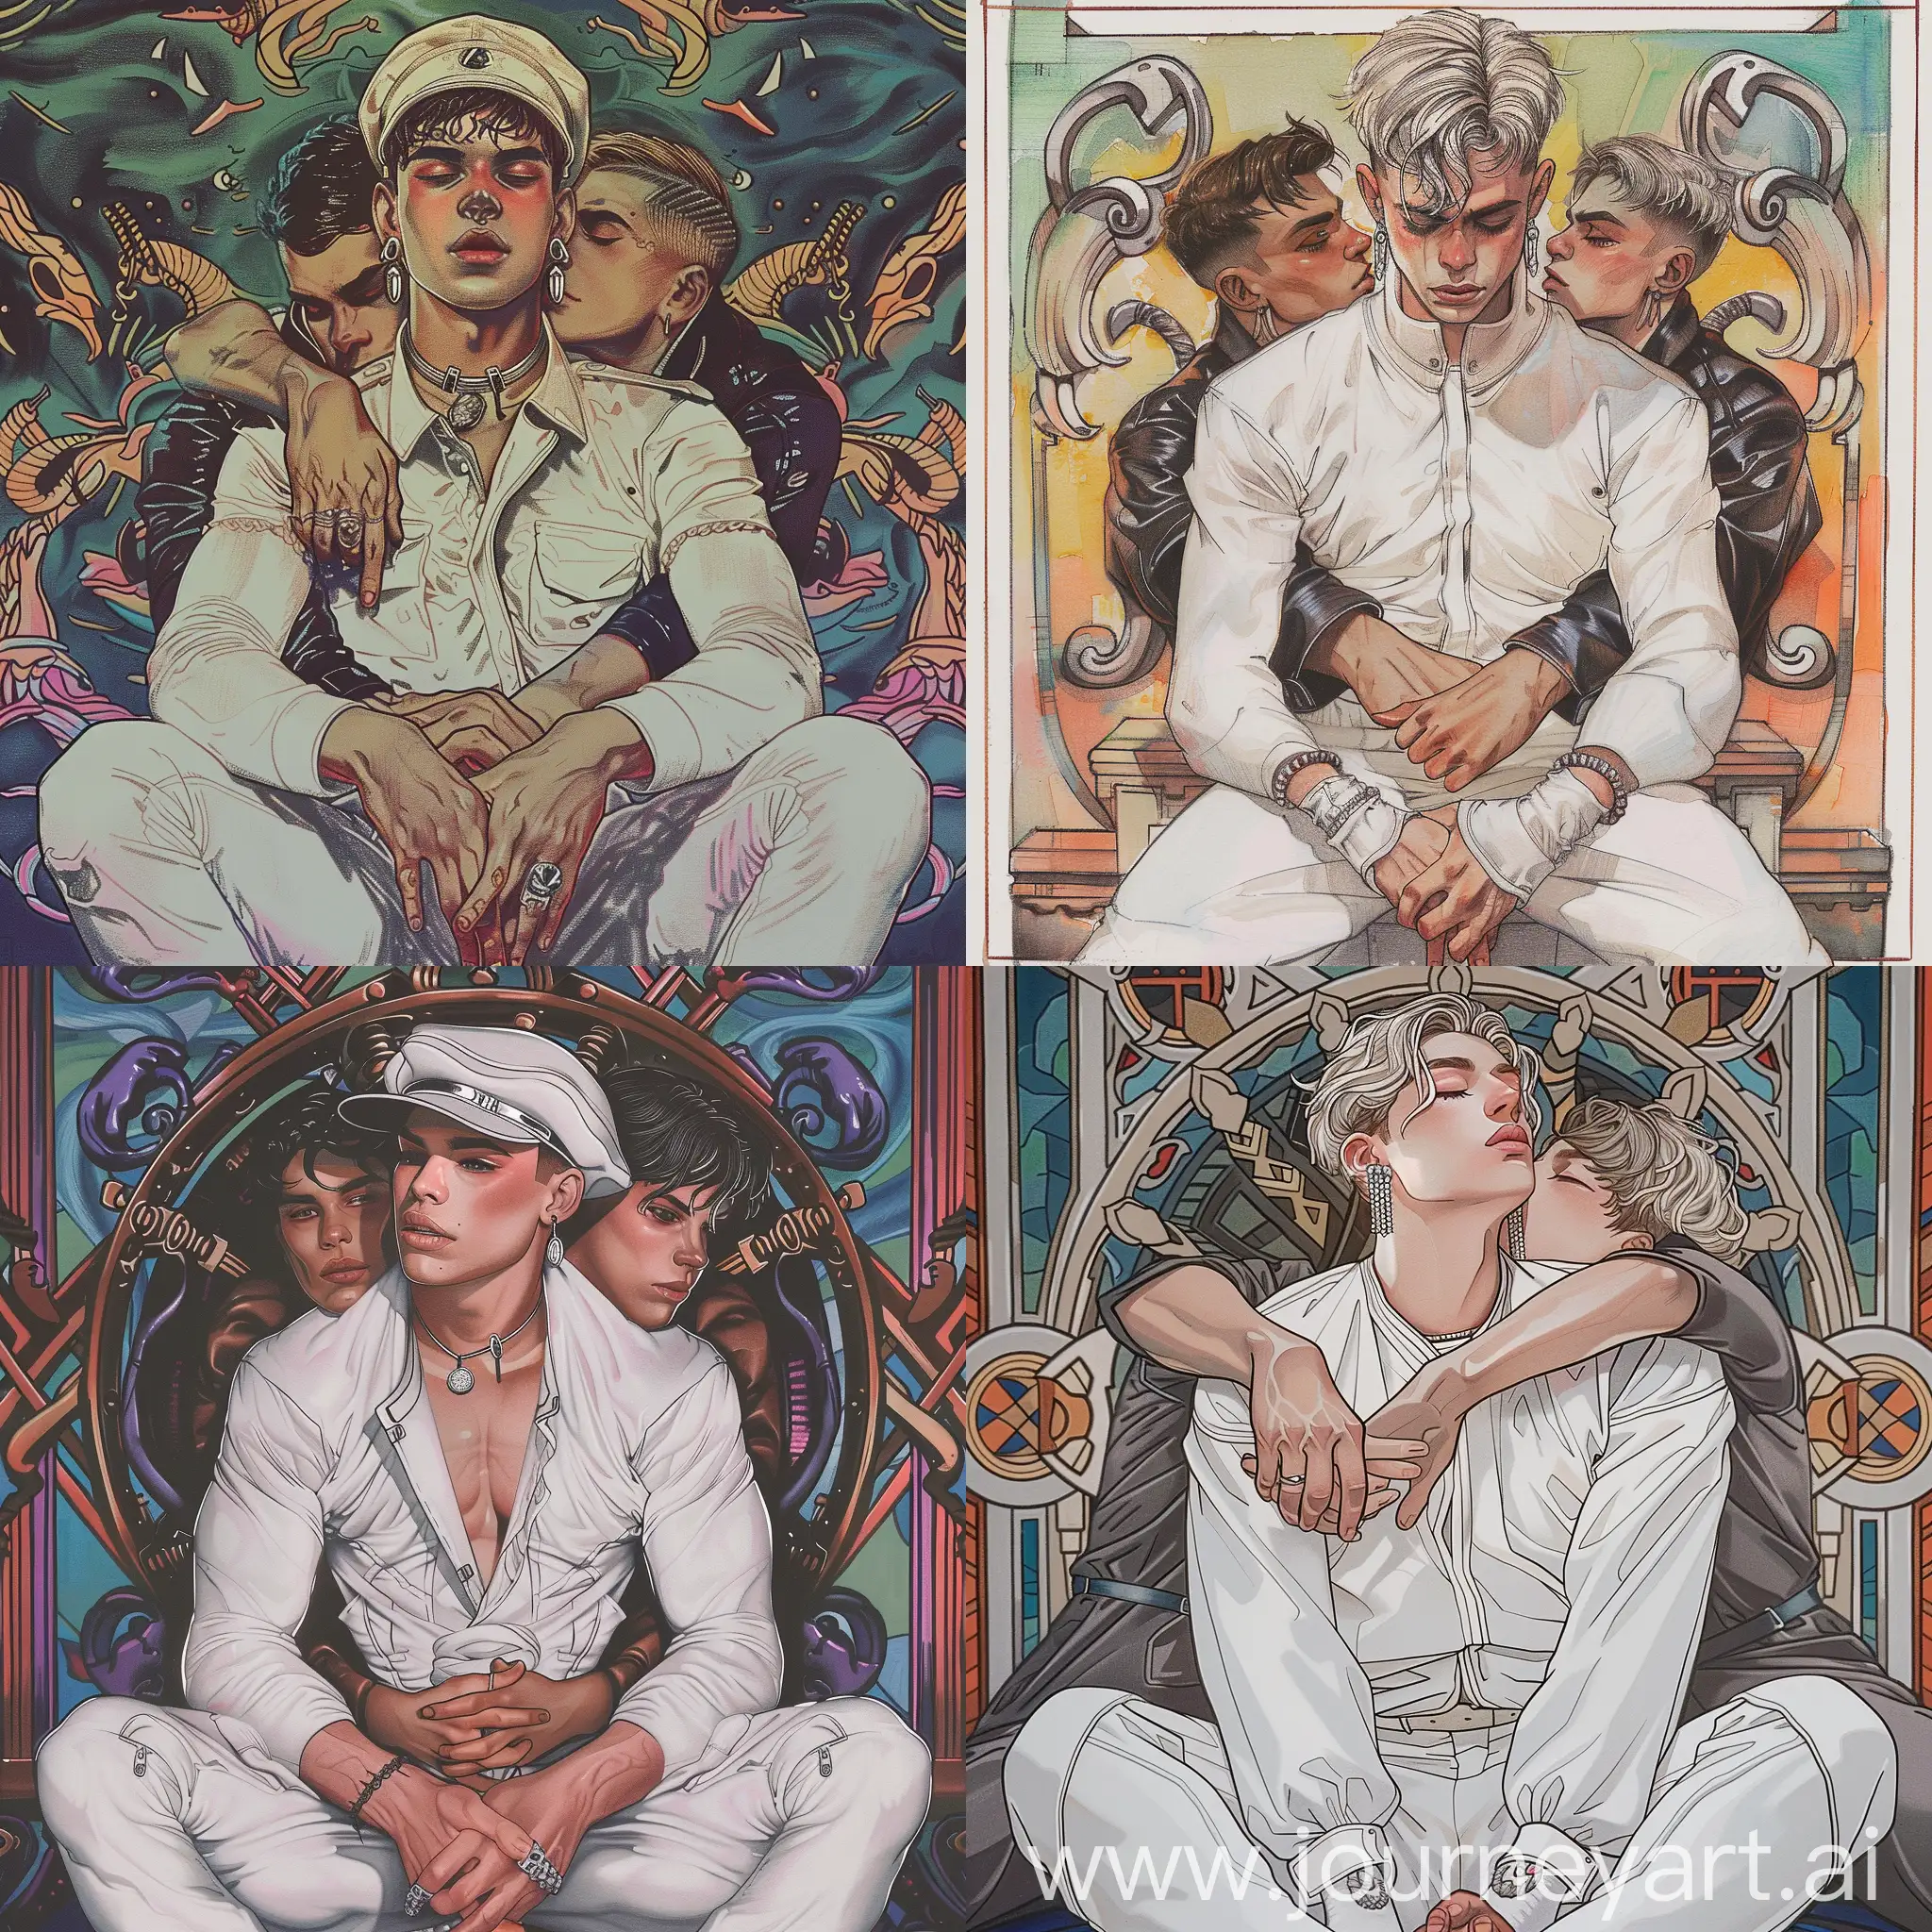 colourful drawing of young male sailor in white outfit, silver earrings, sitting on a harbol wall, hugged by two leatherboys. Tom of Finland style